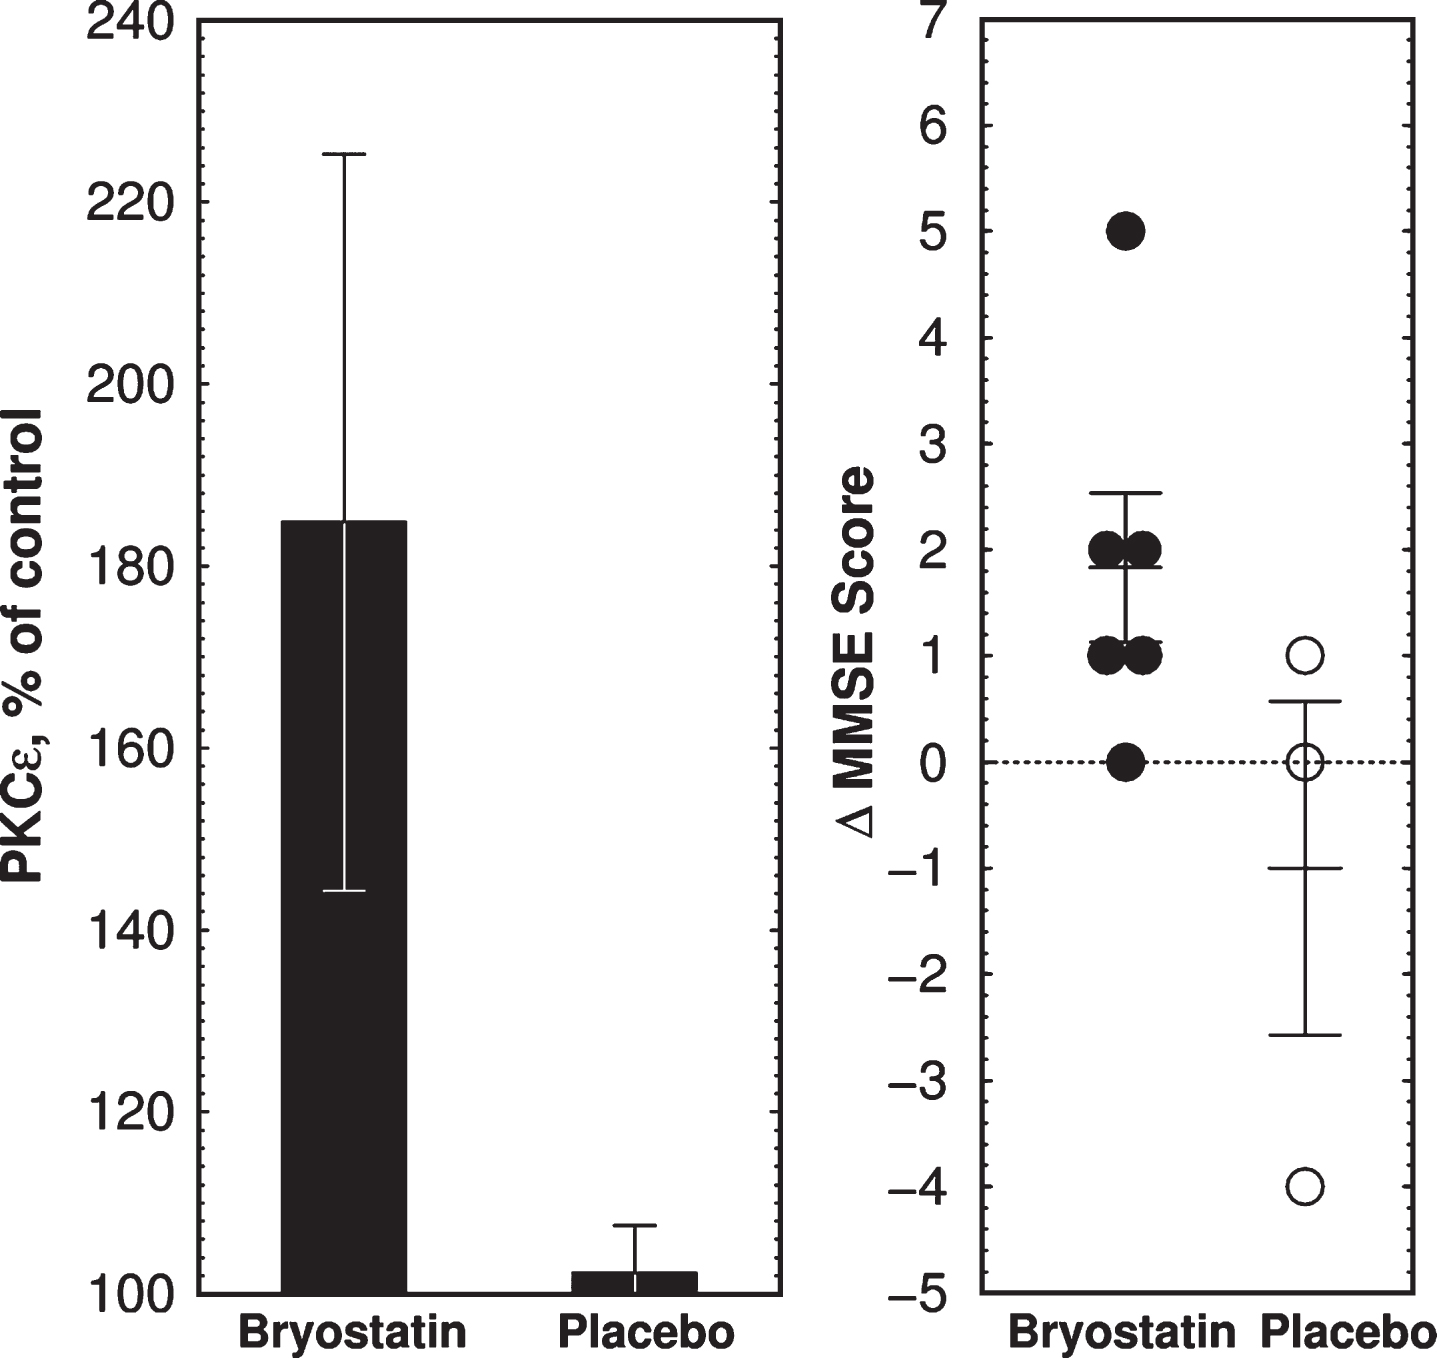 Clinical trial outcome of bryostatin 1 treatment in Phase IIa AD trial. A) Mean PKCɛ changes above preinfusion level at 1 h measured in PBMCs collected from 6 bryostatin 1 and 3 placebo-treated patients. Note expanded y-axis. PKCɛ values are percent of blank-subtracted control in chemiluminescence units (mean±SEM). B) Changes in MMSE scores. MMSE is scored in discrete integers on a scale from 0 (severe dementia) to 30 (normal). MMSE scores in bryostatin-treated subjects were increased at 3 h (p = 0.041, paired t-test) but not at 4d or 15d (not shown).